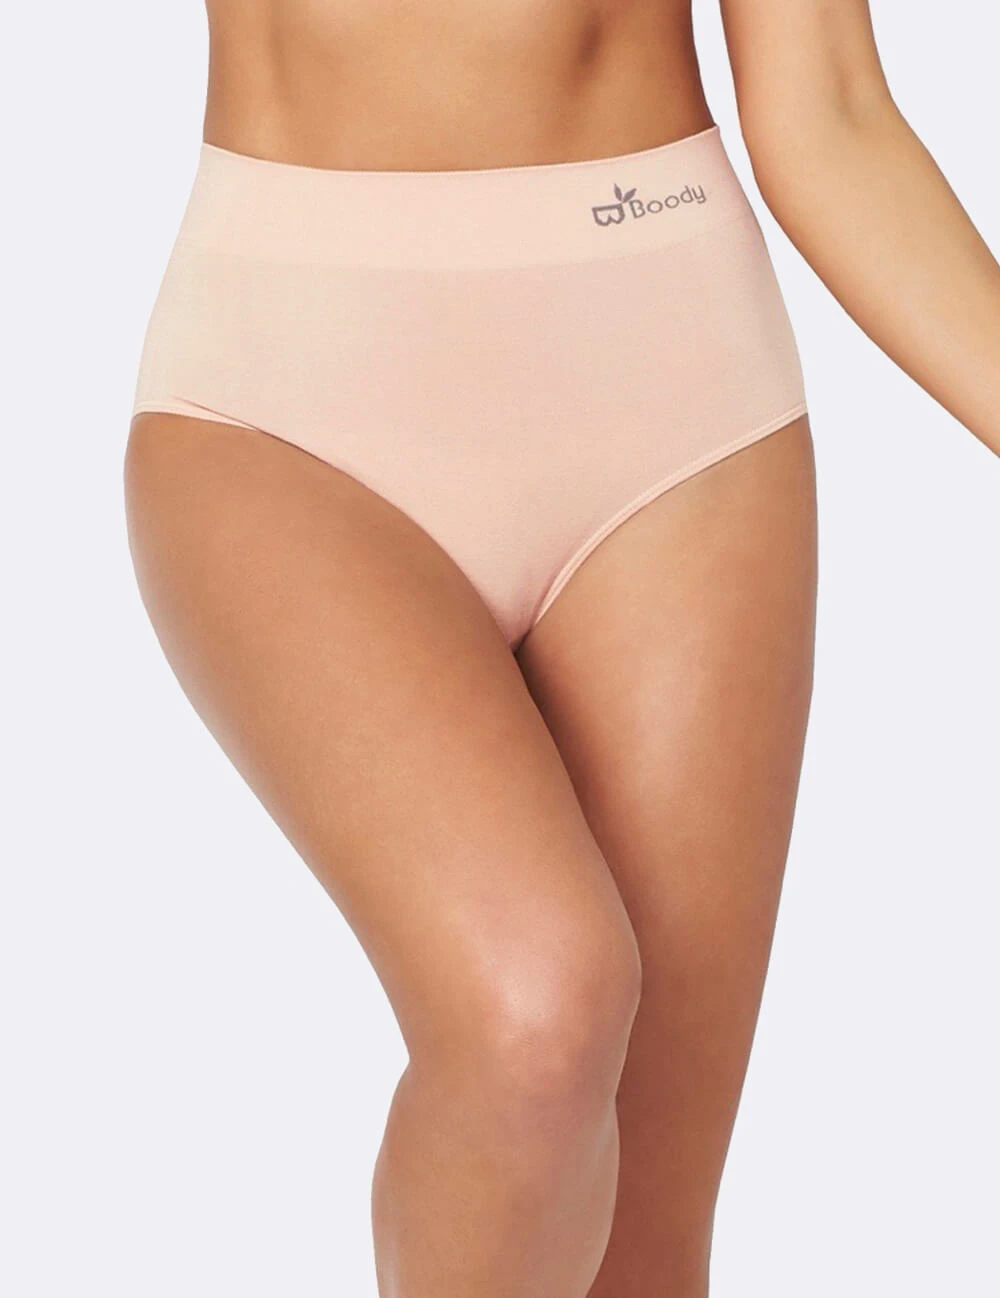 Soft nude maternity panties made of bamboo fibres